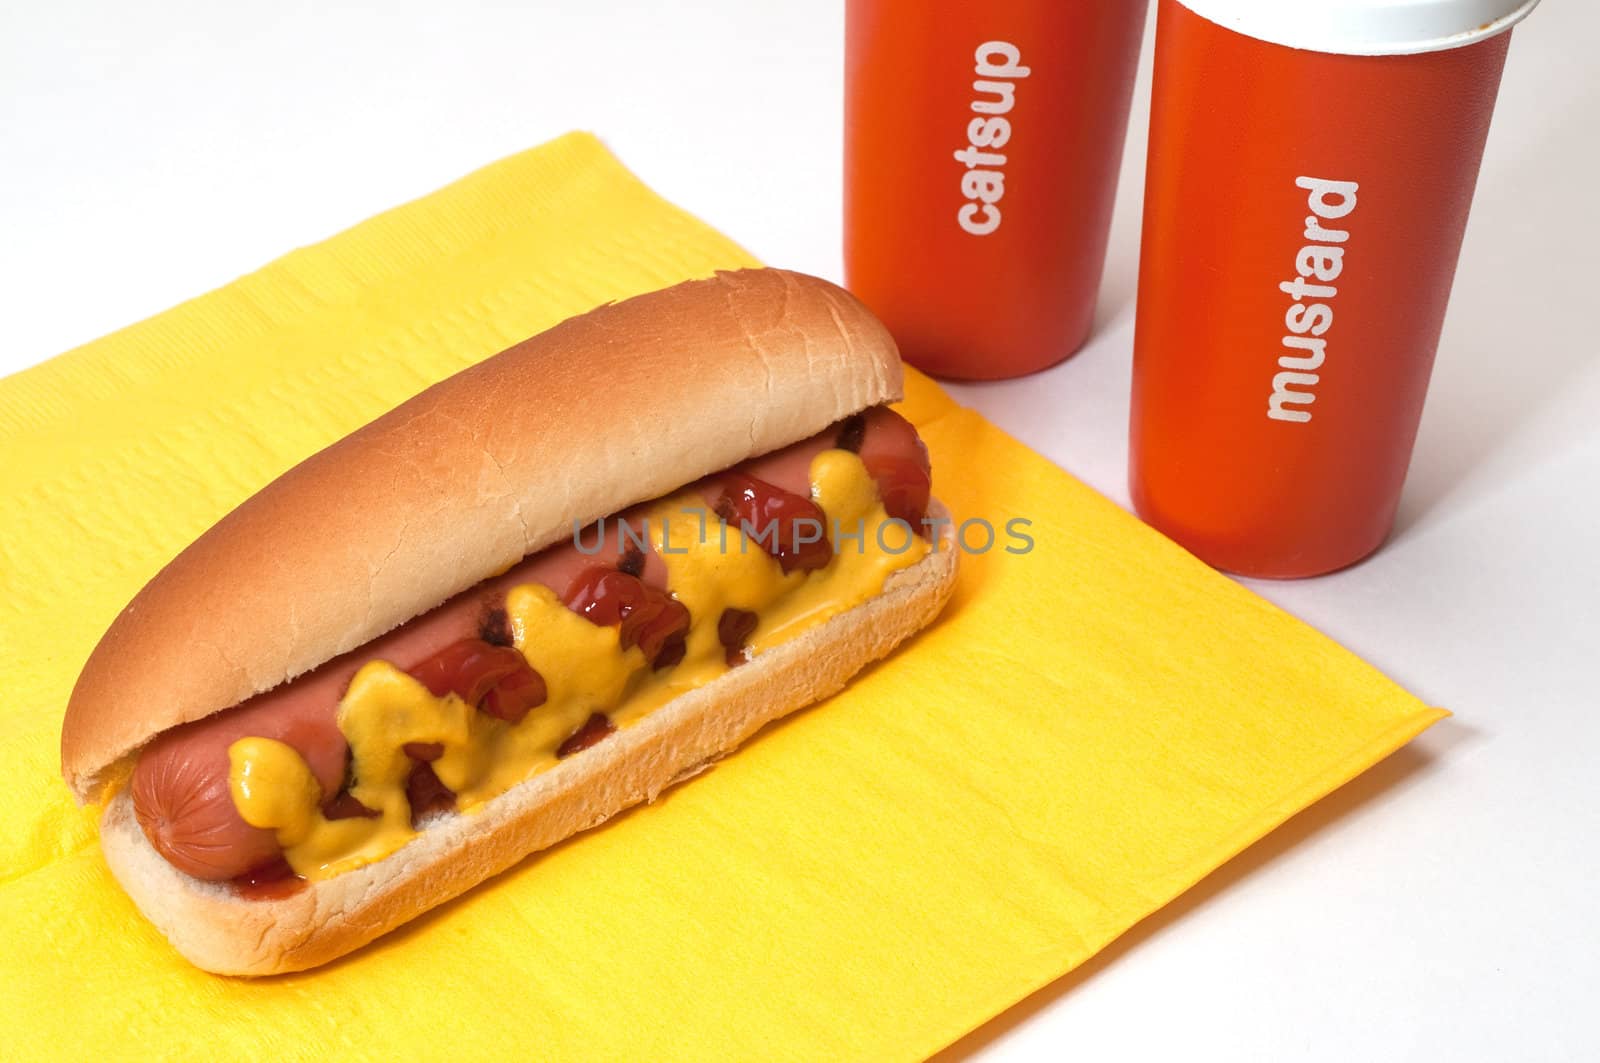 Hot dog with ketchup and mustard on yellow napkin.  Condiment bottles in background. 